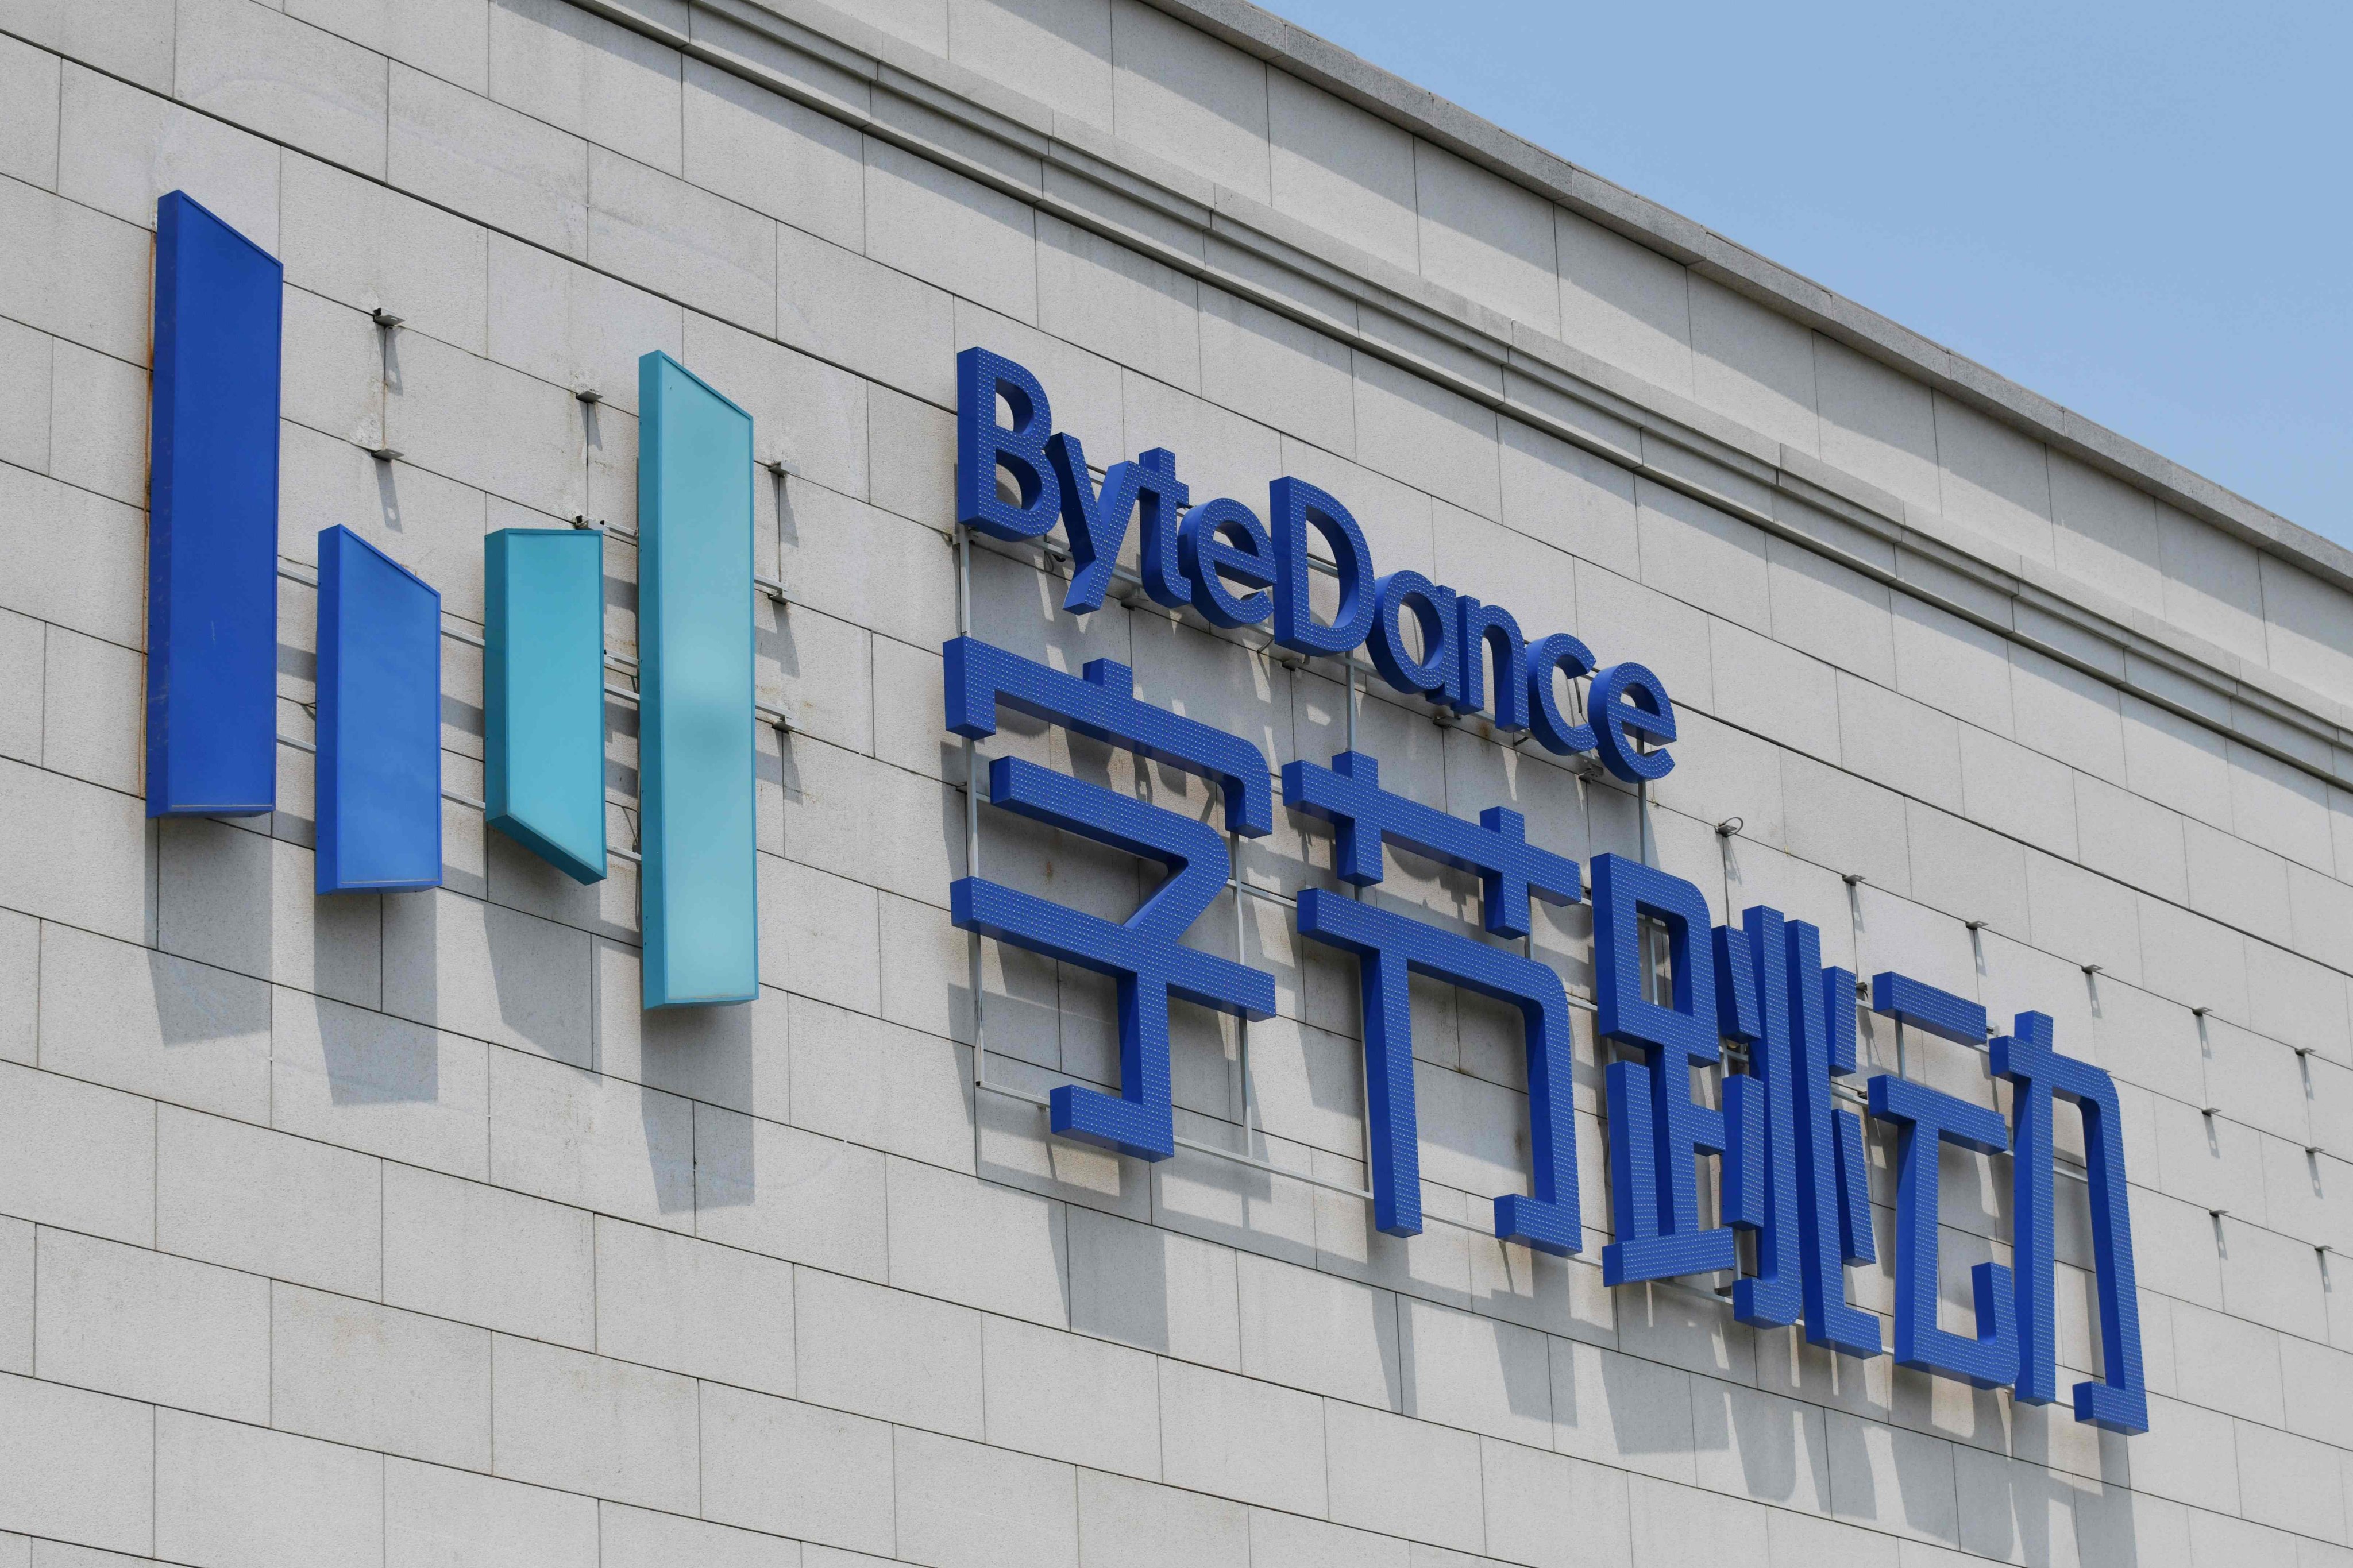 The ByteDance logo is seen on the facade of its headquarters in Beijing on July 8, 2020. Photo: AFP